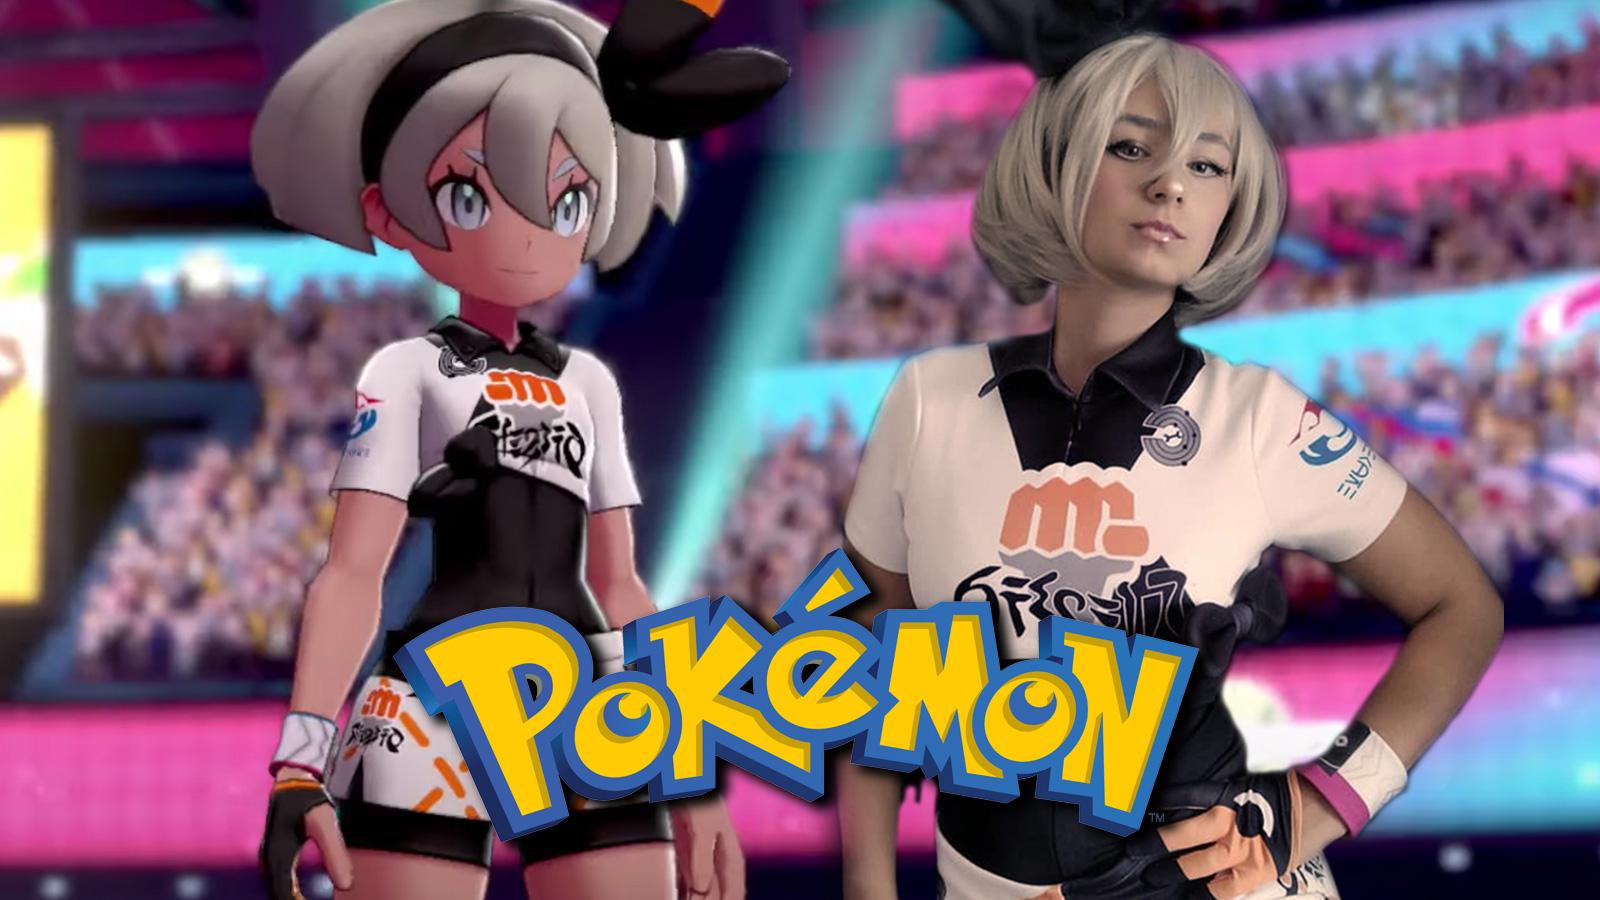 Pokemon Sword cosplayer fights her way to victory as Gym Leader Bea -  Dexerto